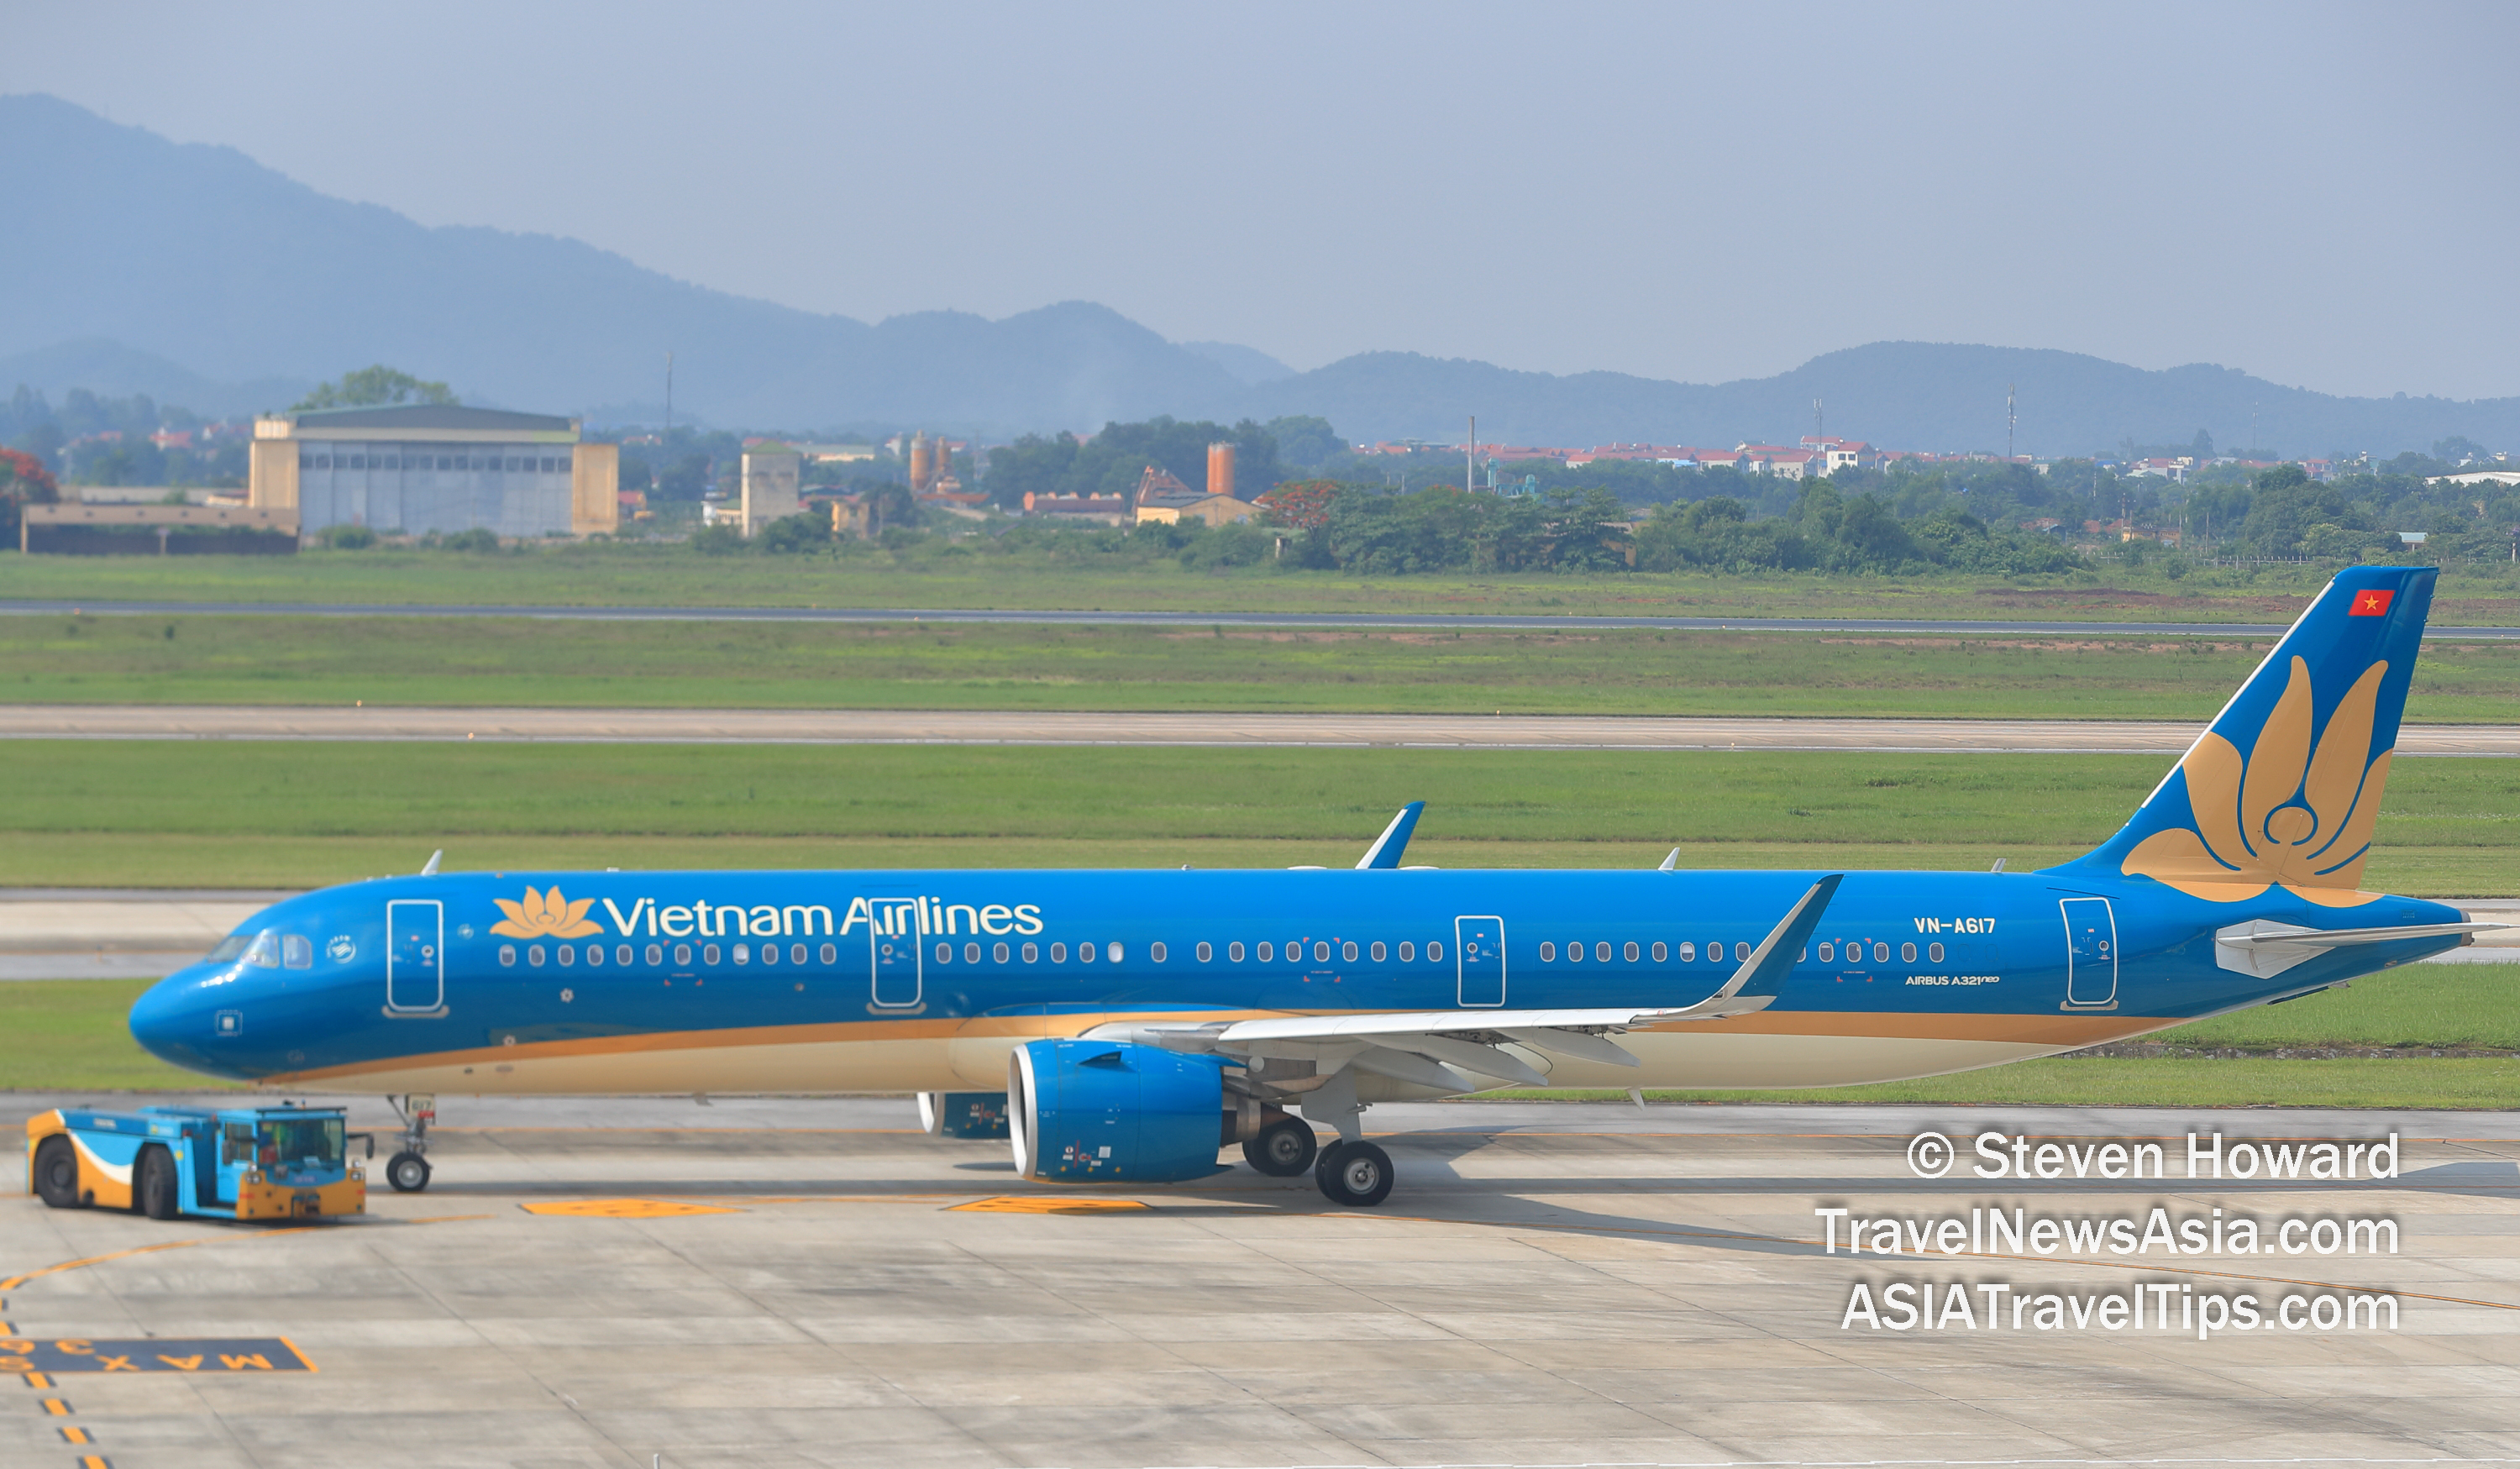 Vietnam Airlines Airbus A321neo VN-A617. Picture by Steven Howard of TravelNewsAsia.com Click to enlarge.